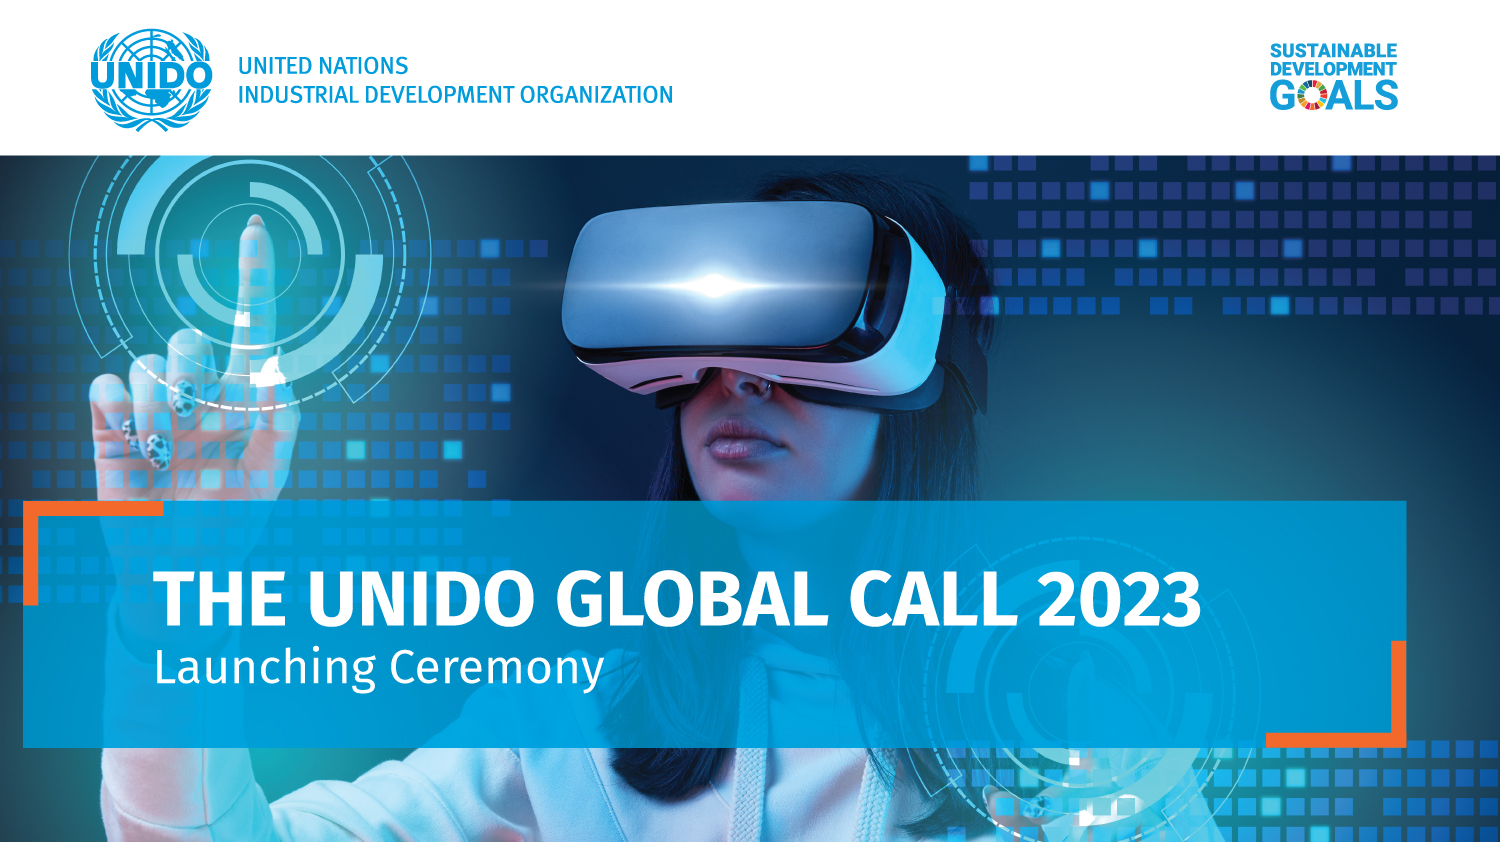 The UNDO Global Call 2023 launching ceremony image